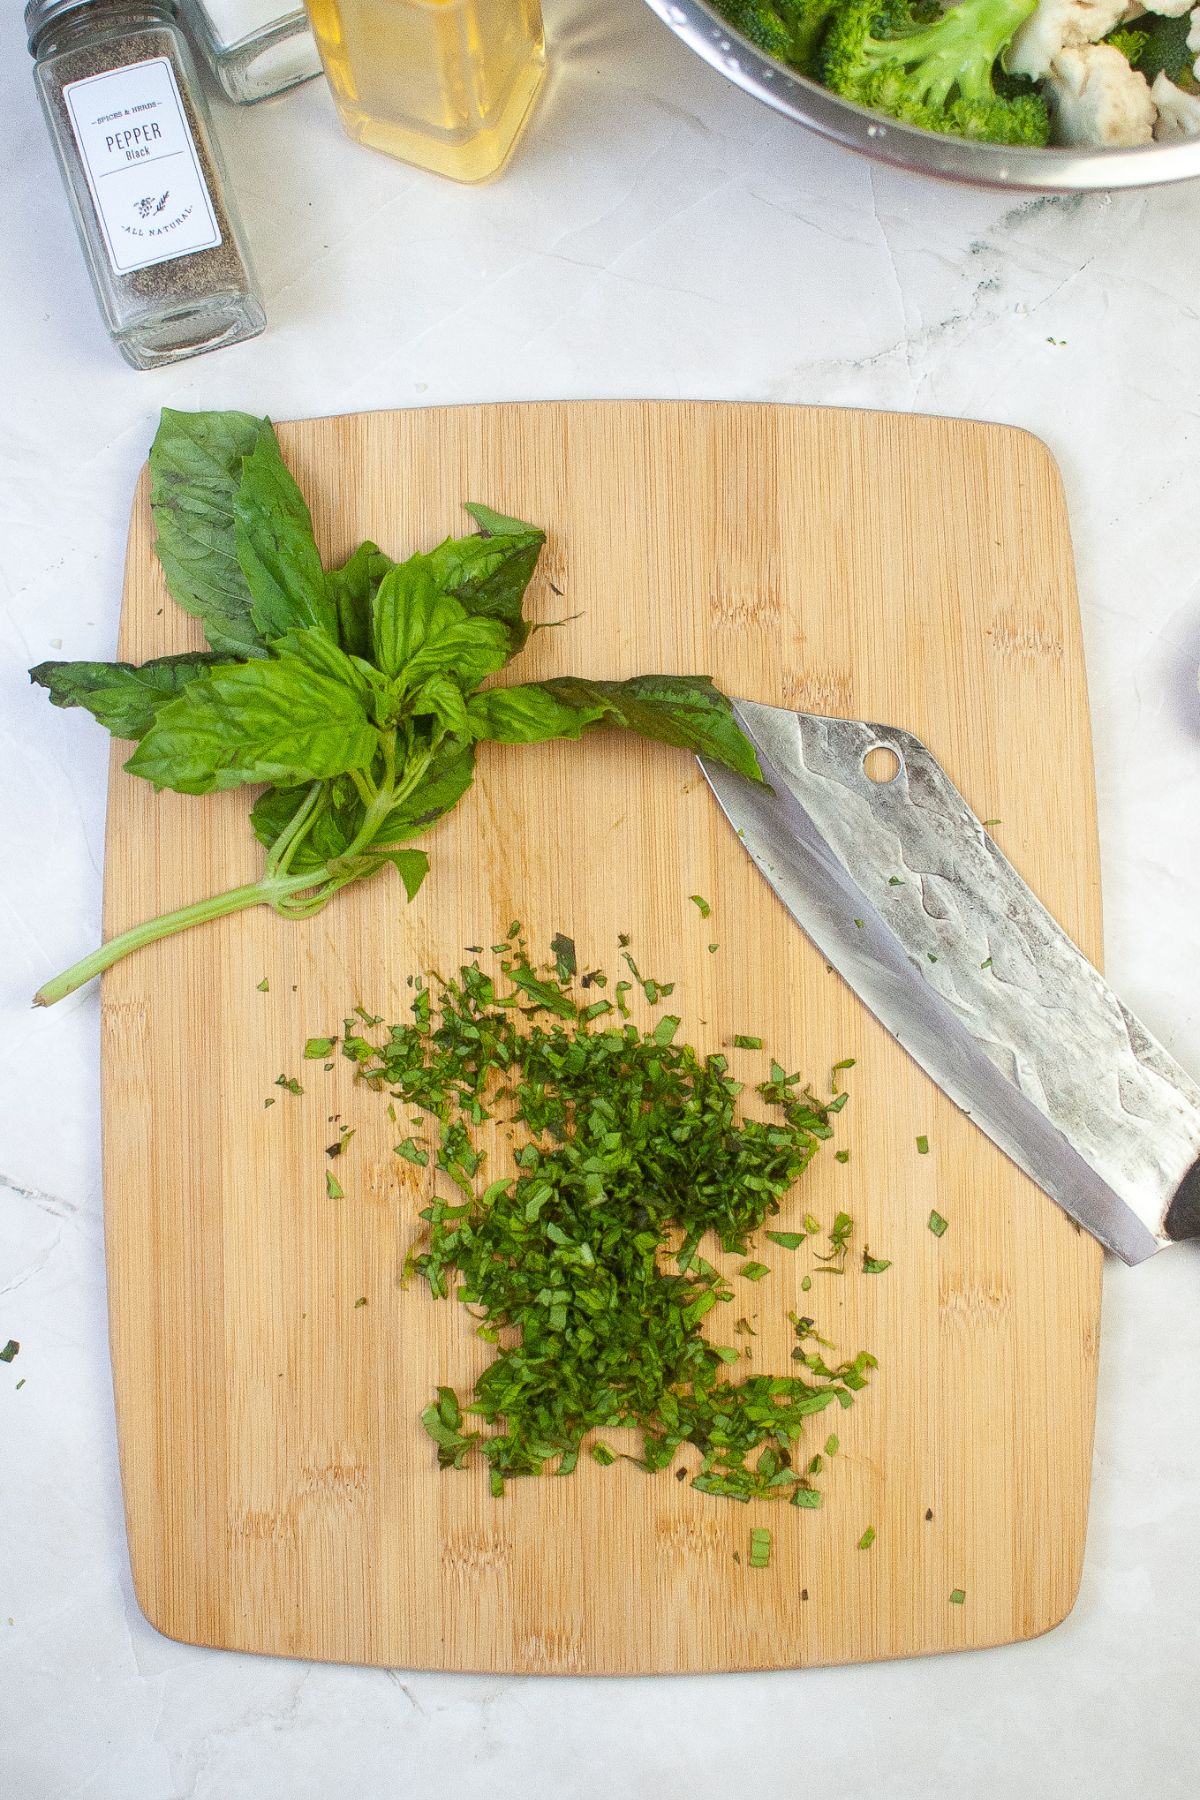 basil being chopped on a wooden cutting board.